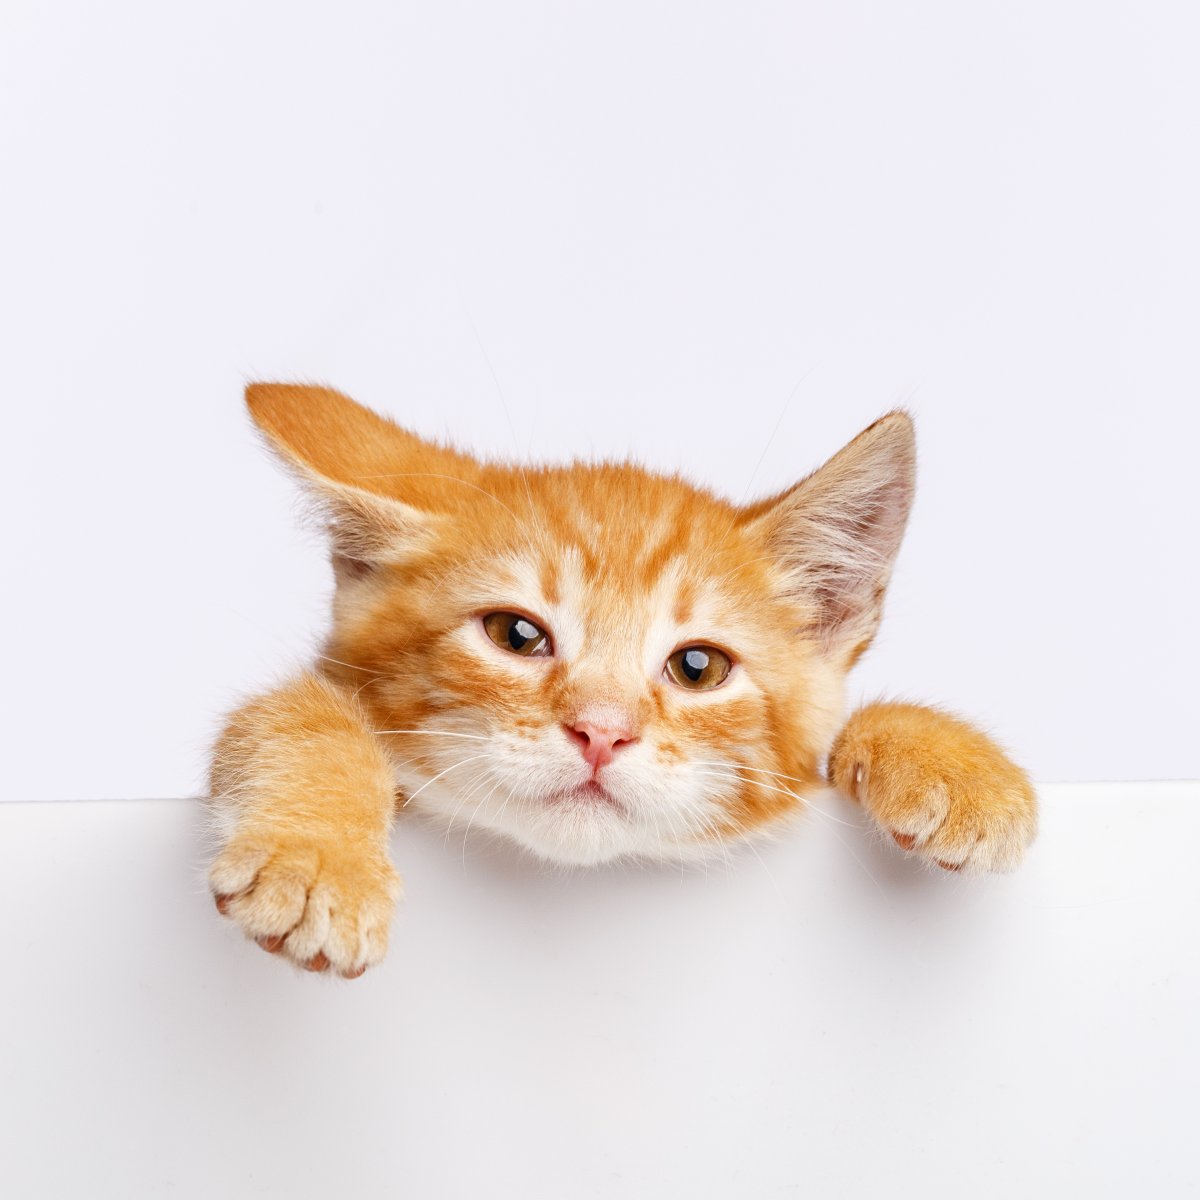 5 Signs and How To Help a Teething Kitten